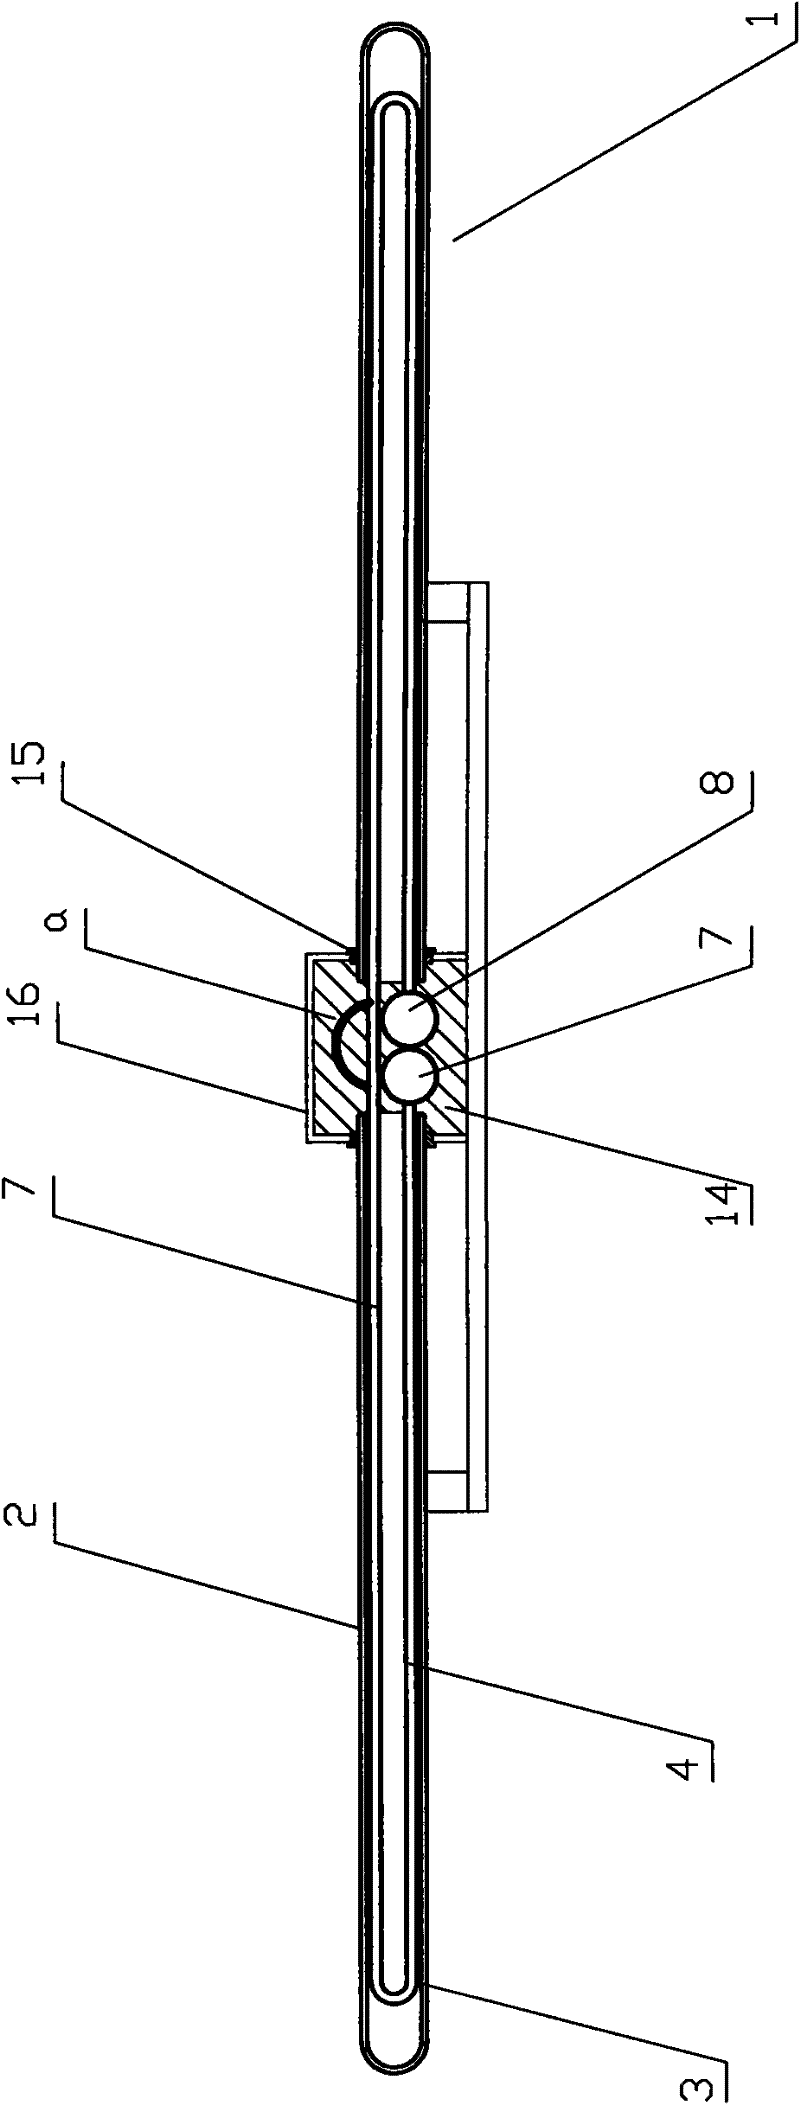 Heat collecting system with double-row solar vacuum tube matrix